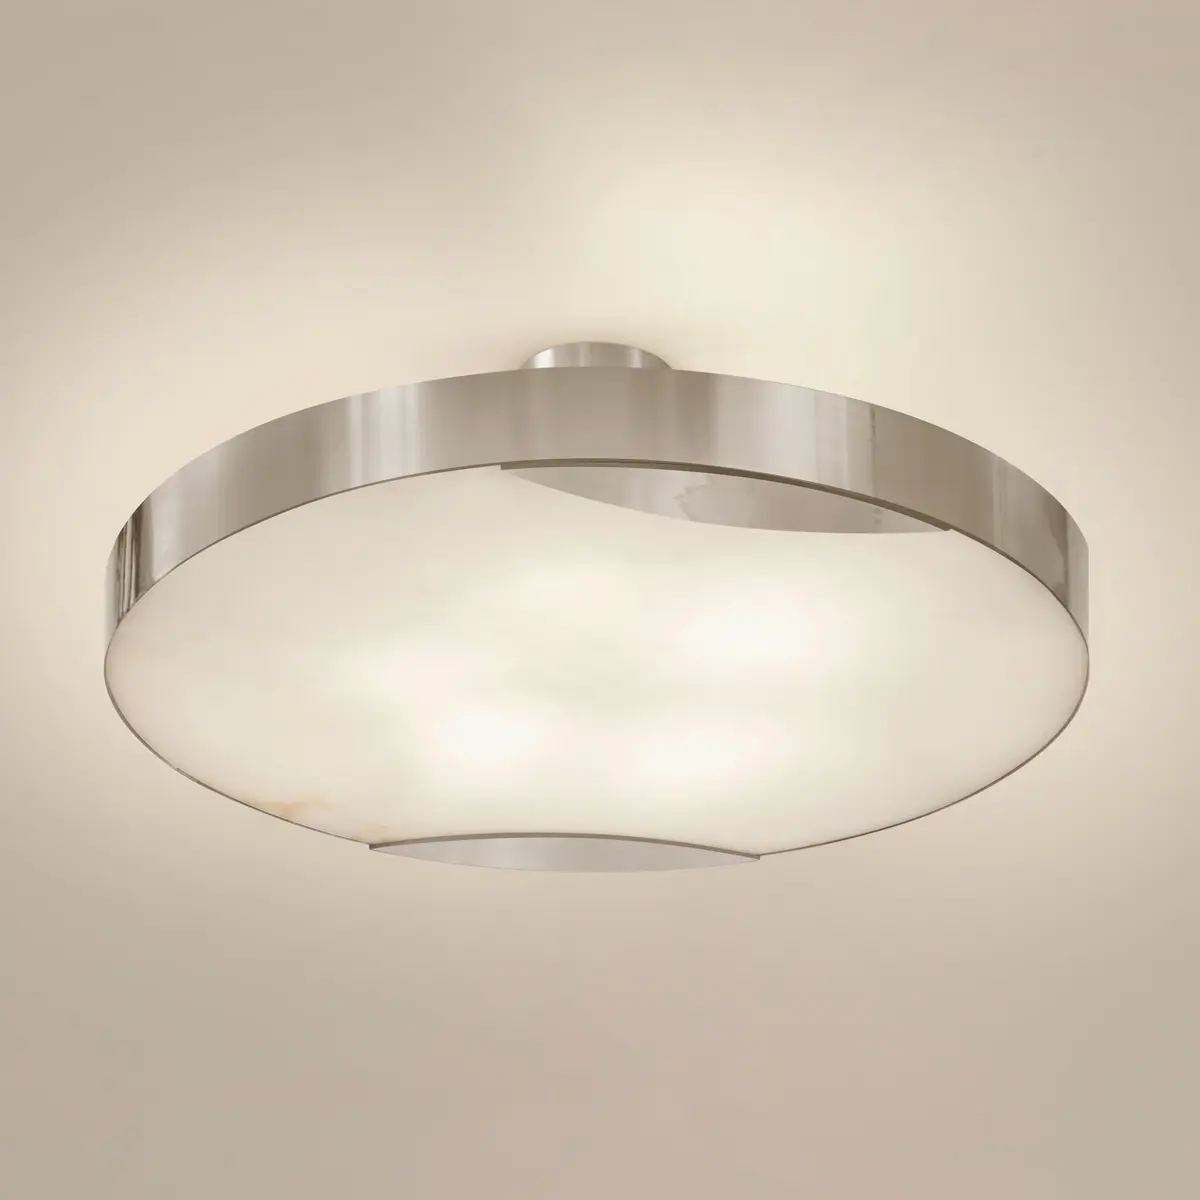 Cloud N.1 Ceiling Light by Gaspare Asaro